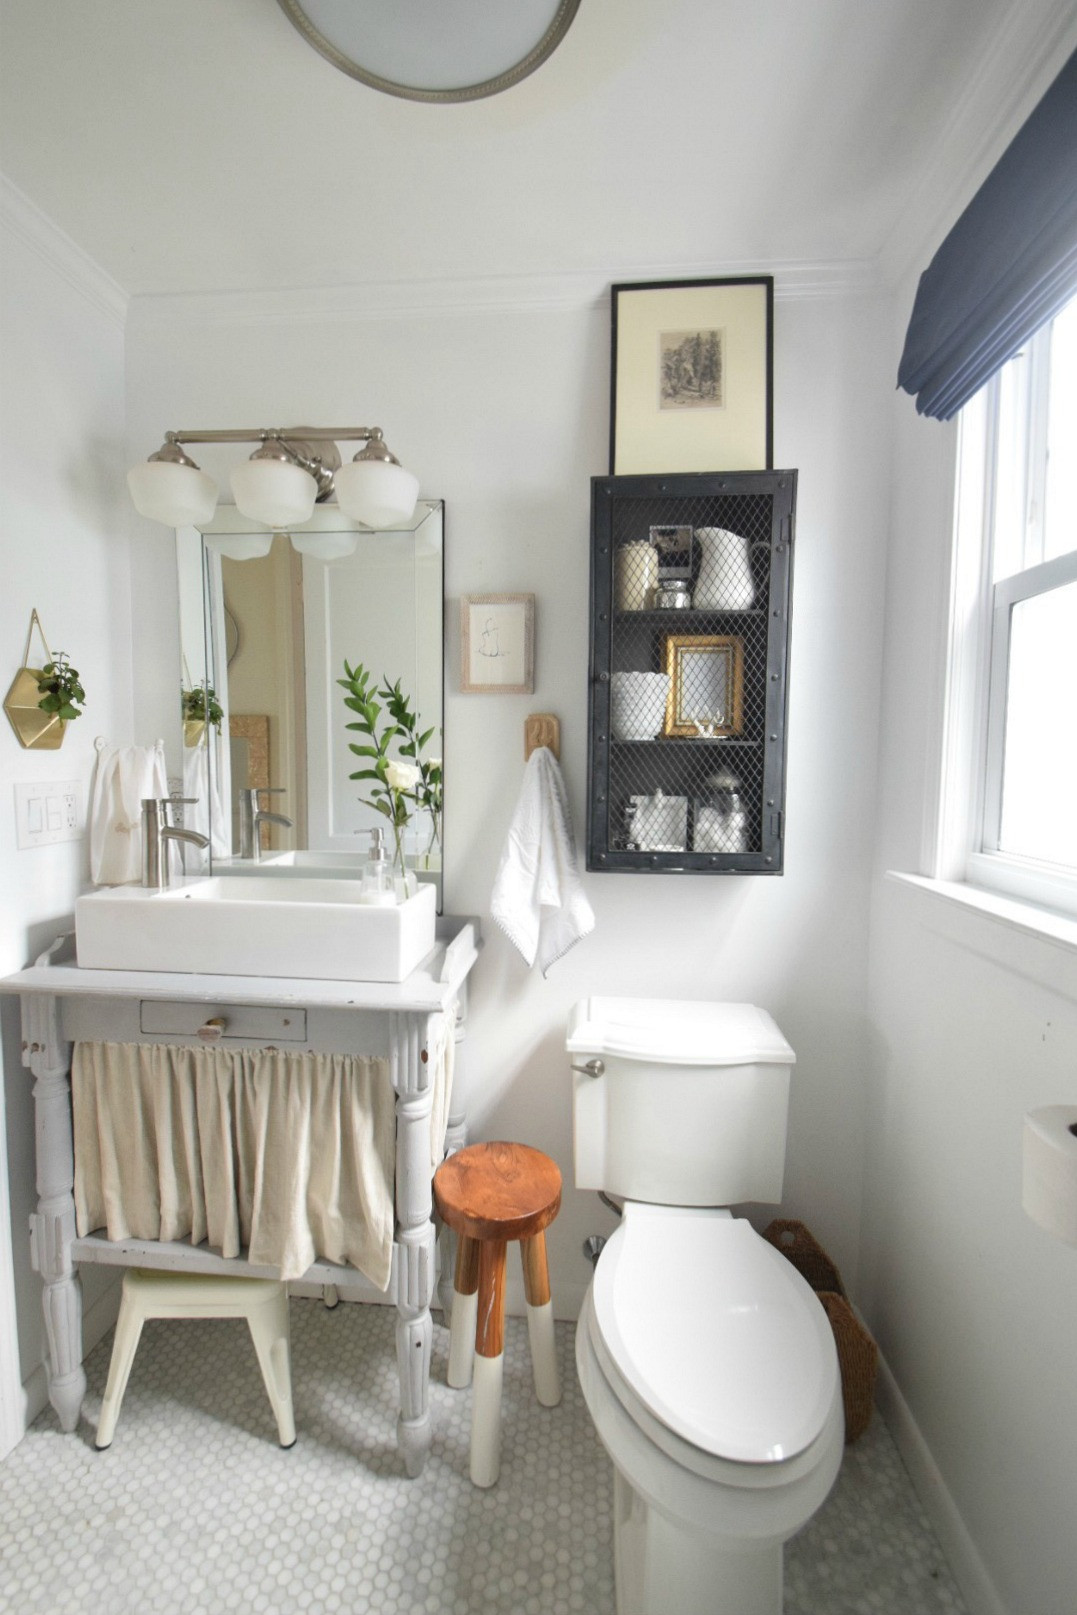 Bathroom Design Ideas Small
 Small Bathroom Ideas and Solutions in our Tiny Cape